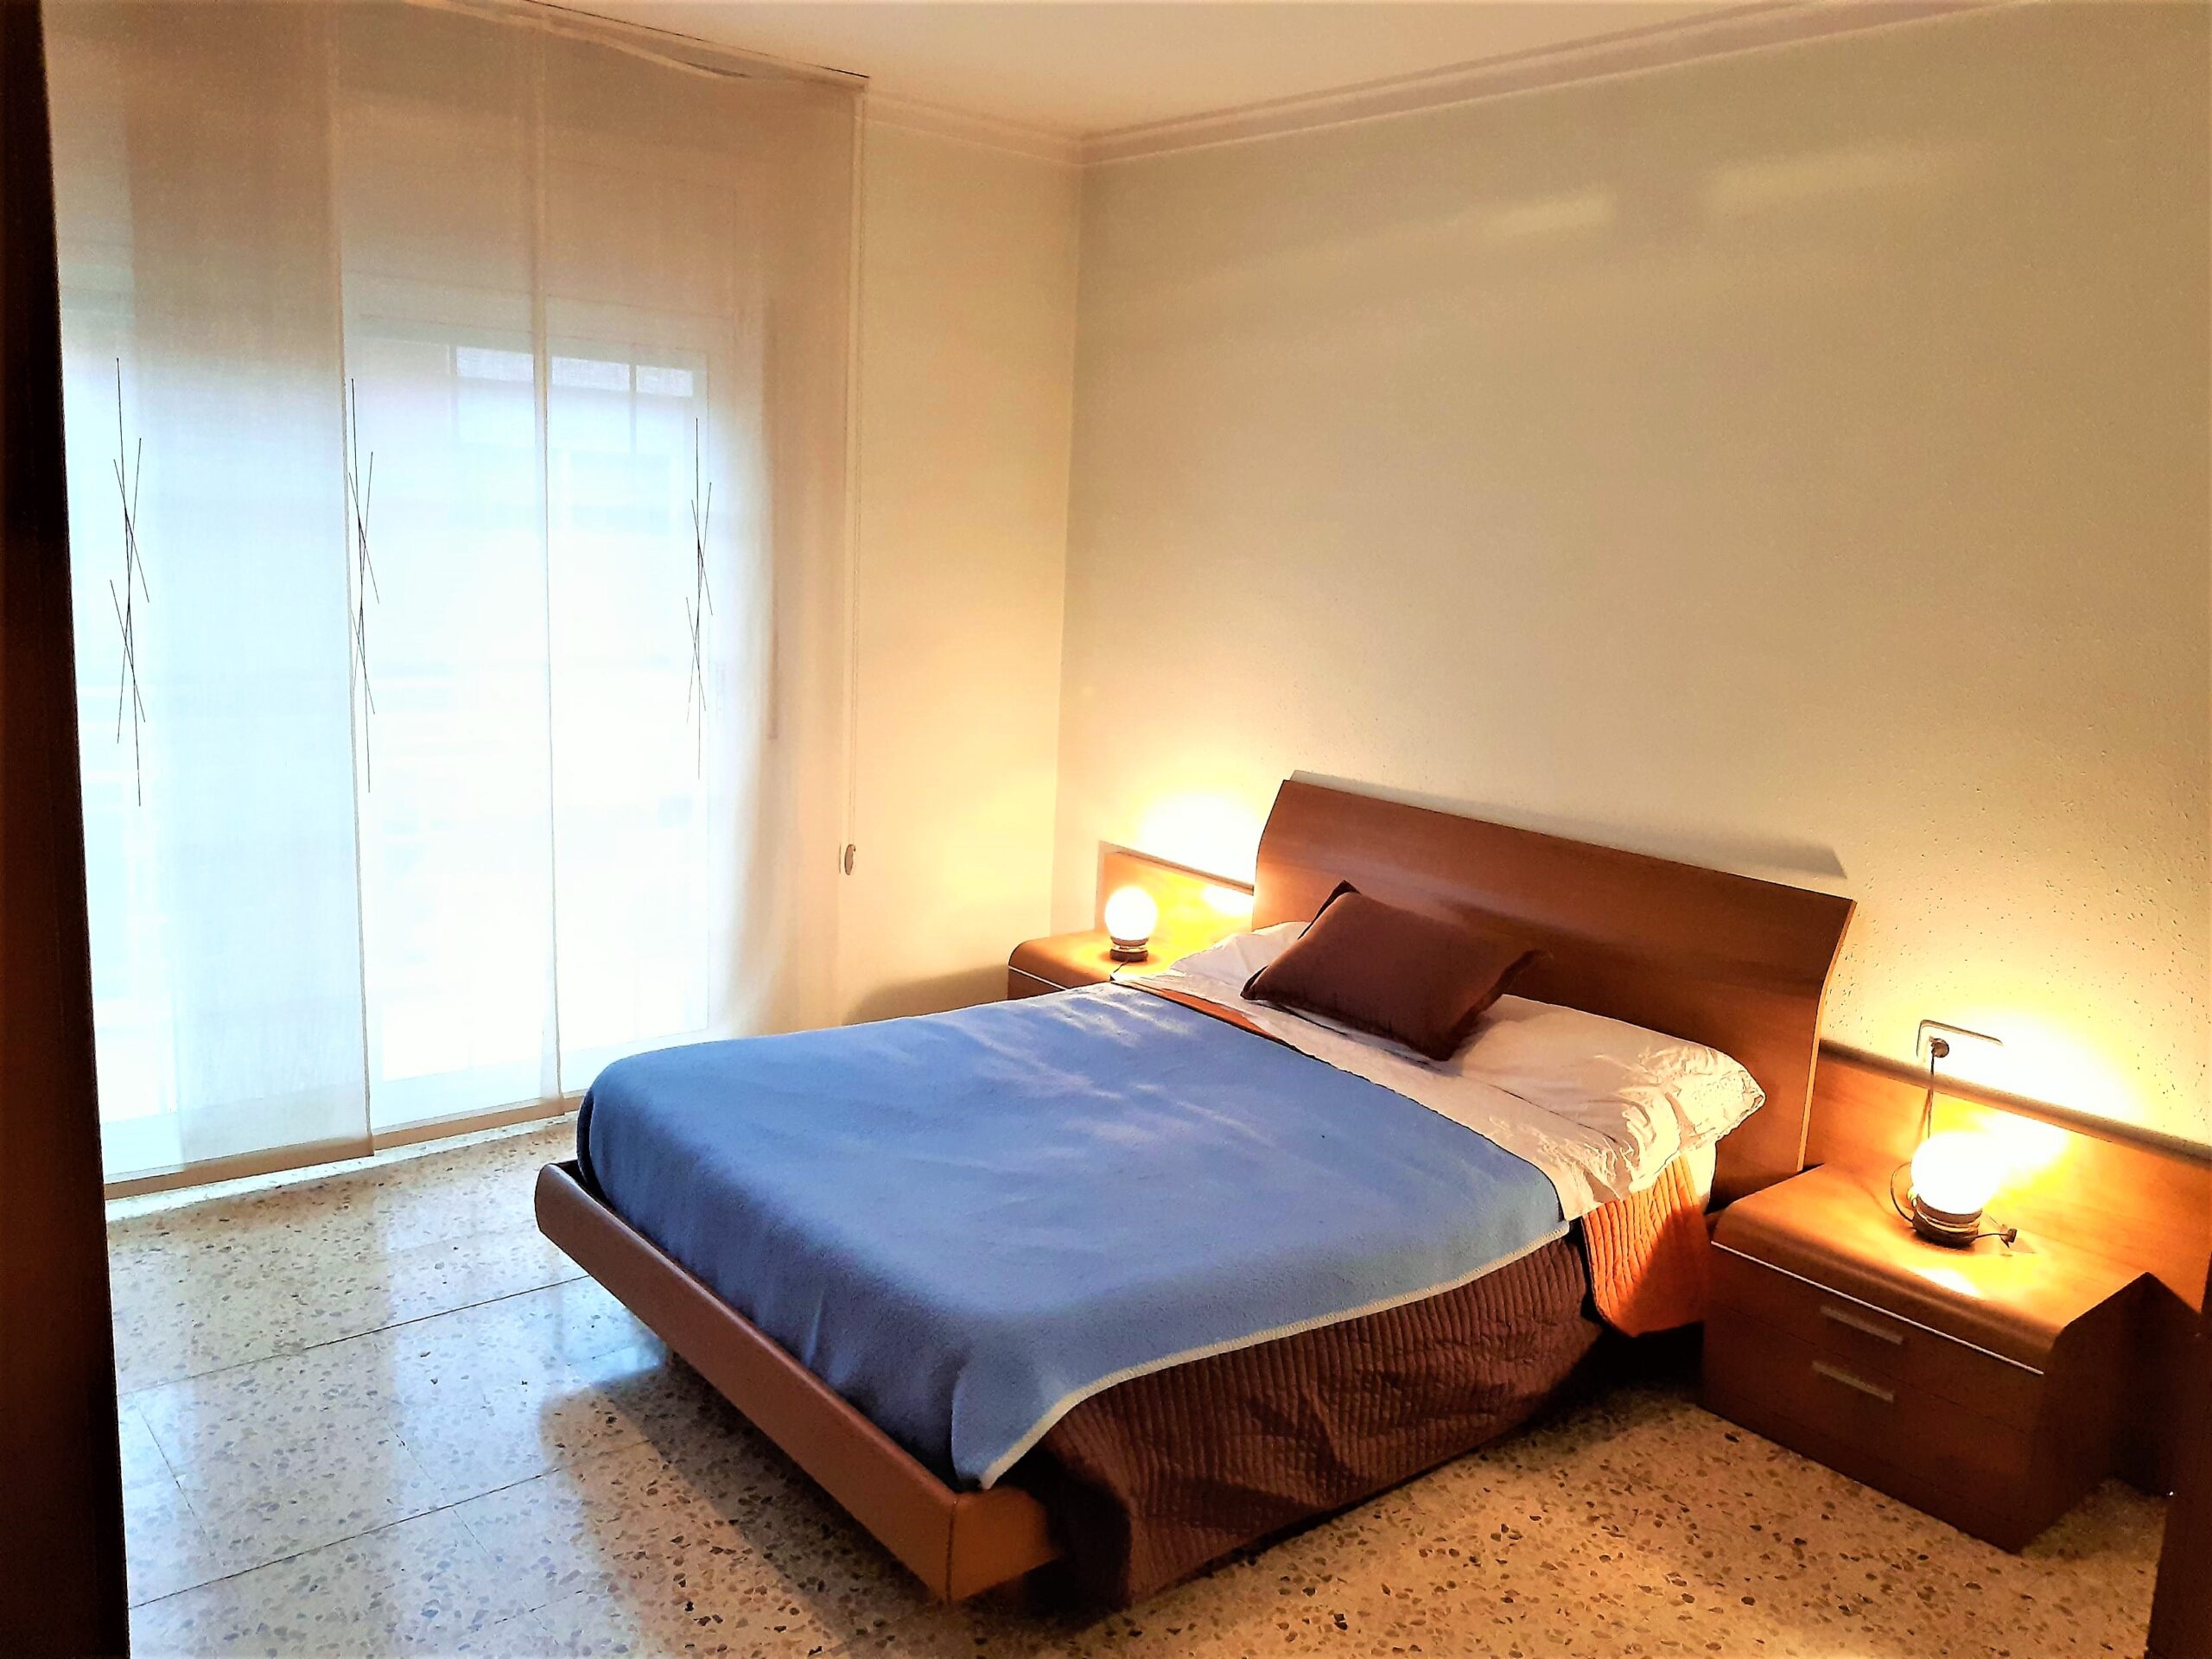 Code 963490. Large single room in large renovated apartment with terrace located in Sabadell.